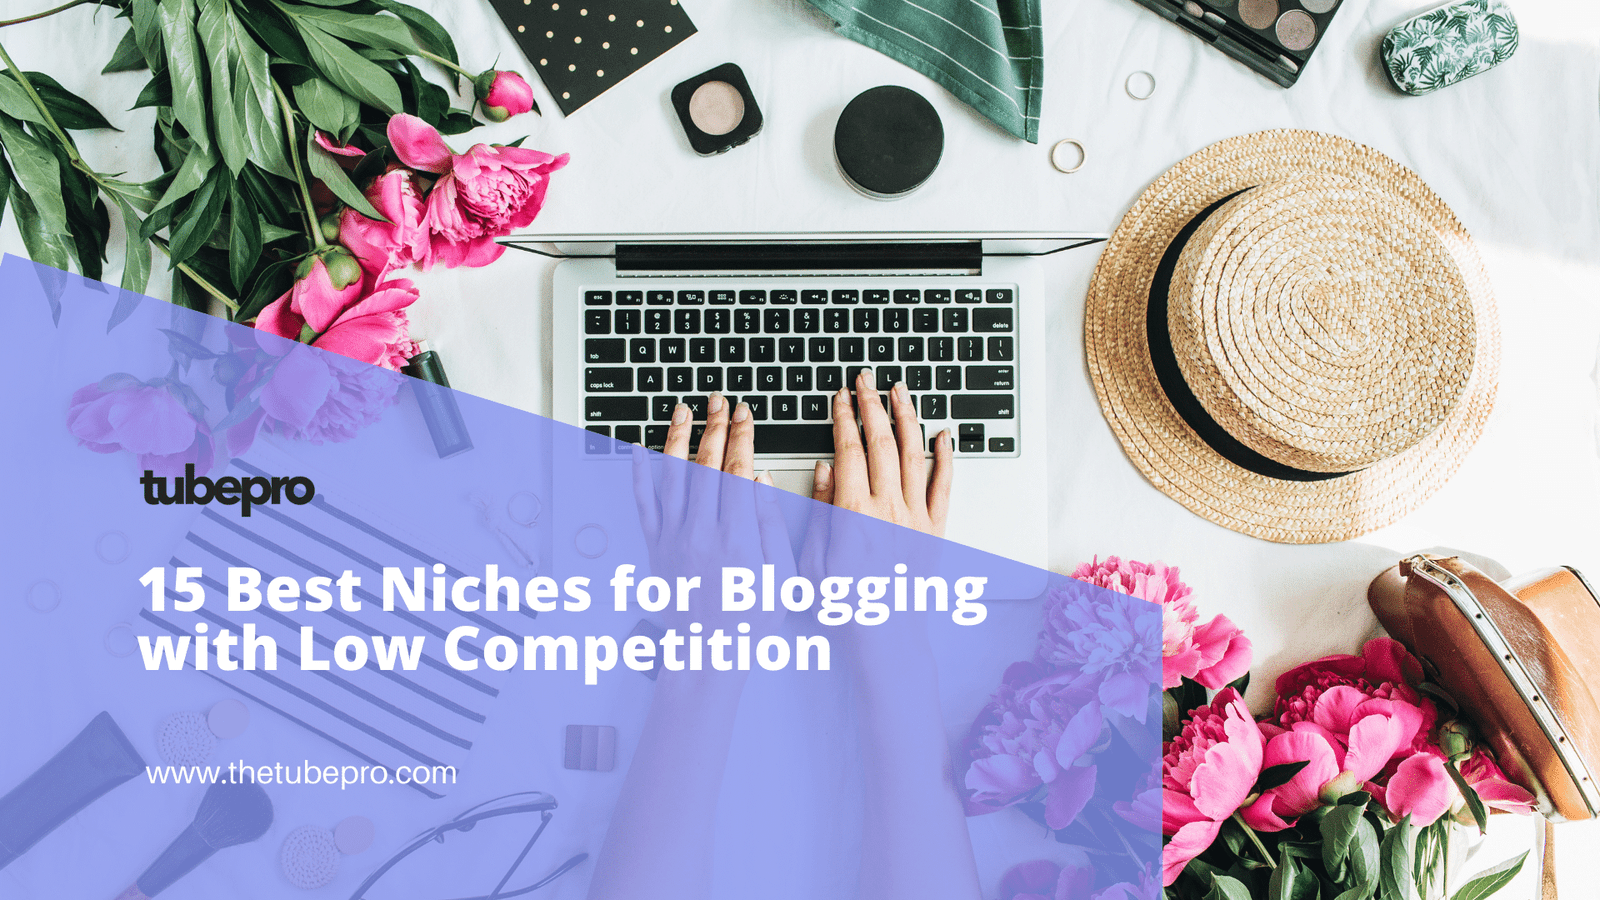 15 Best Niches for Blogging with Low Competition